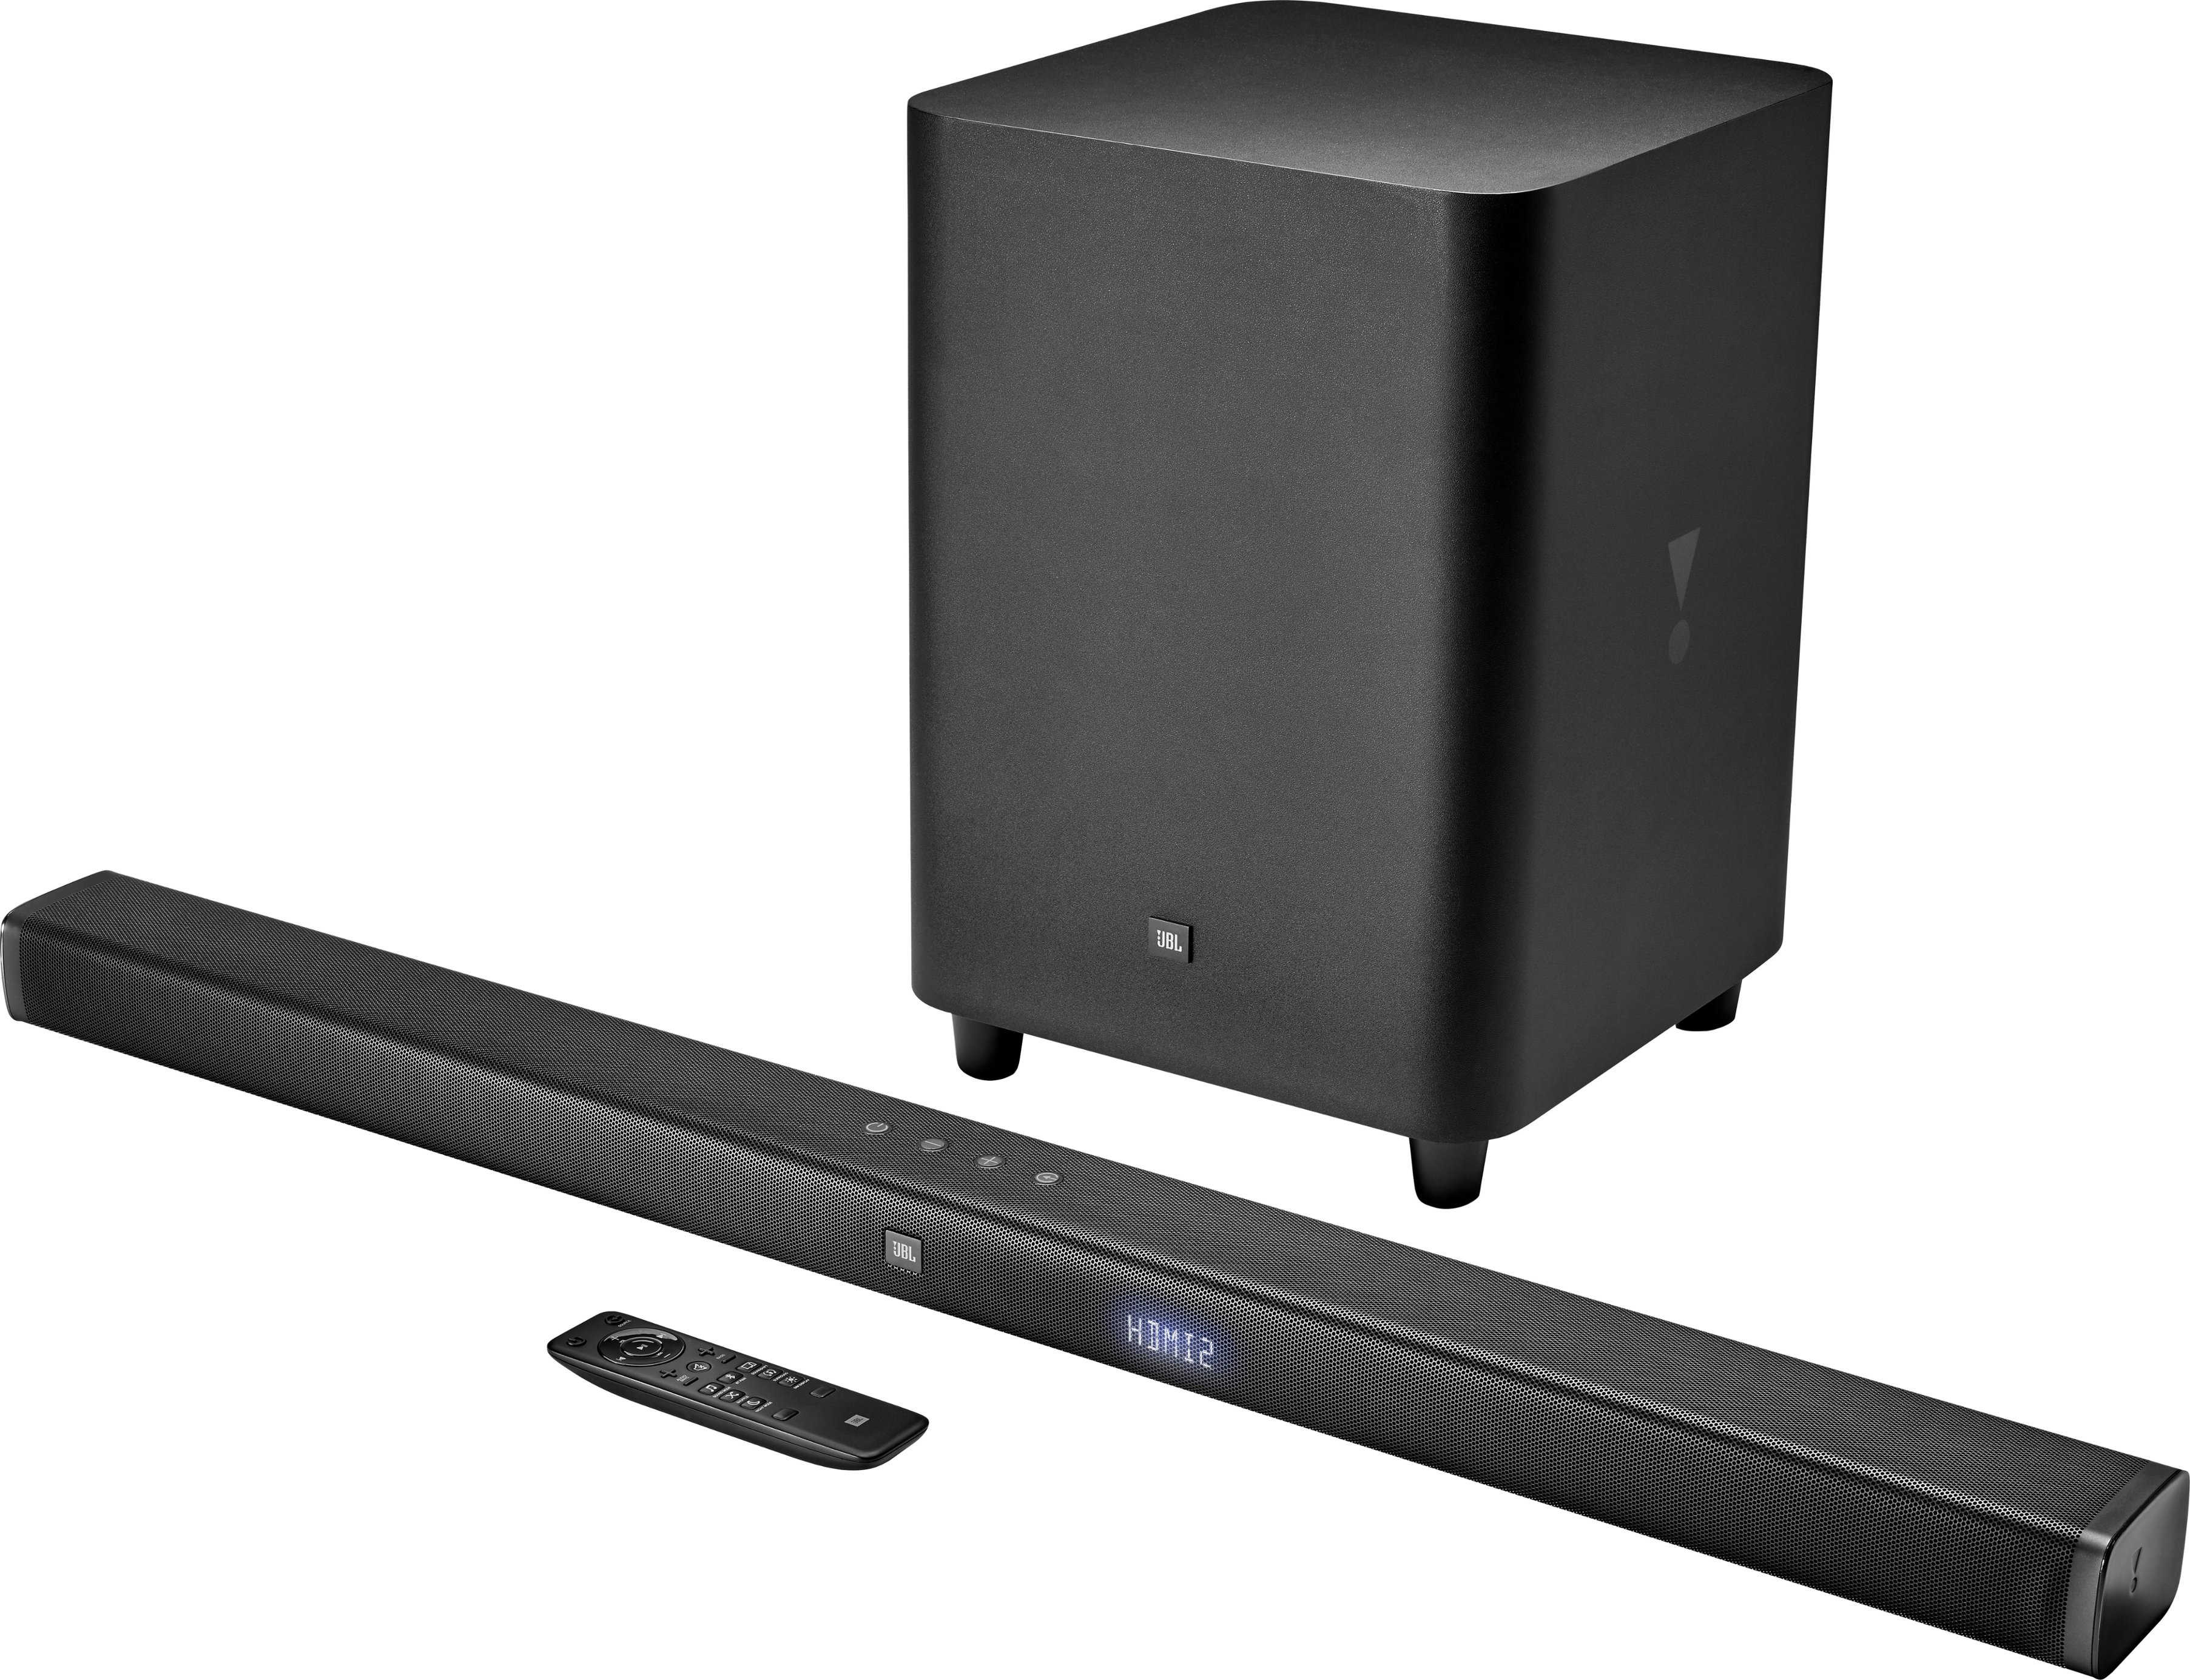 sound bars for sale at best buy